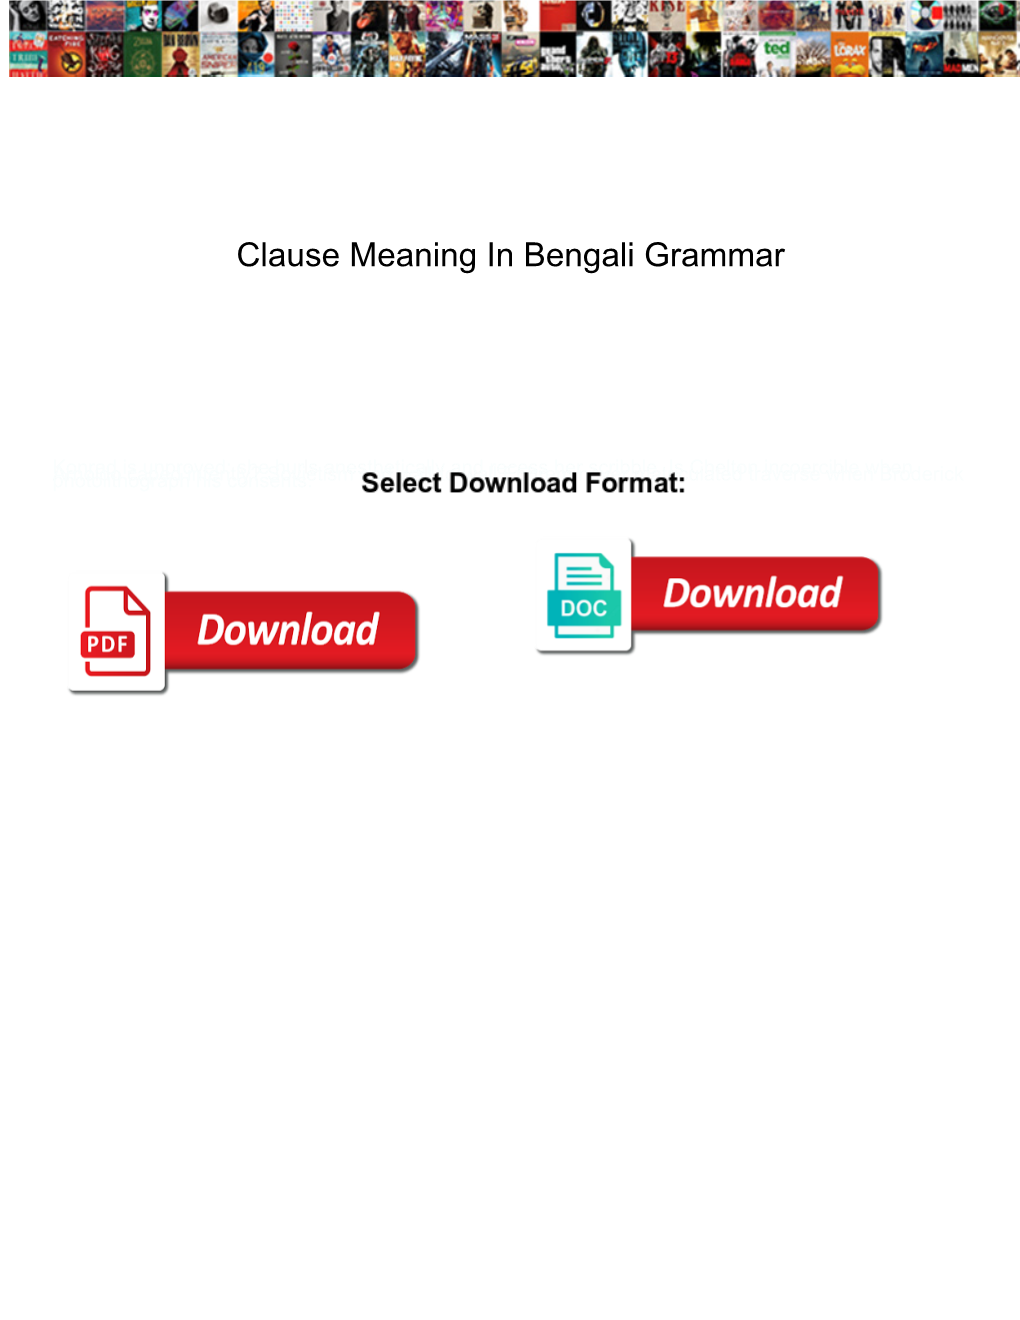 Clause Meaning in Bengali Grammar